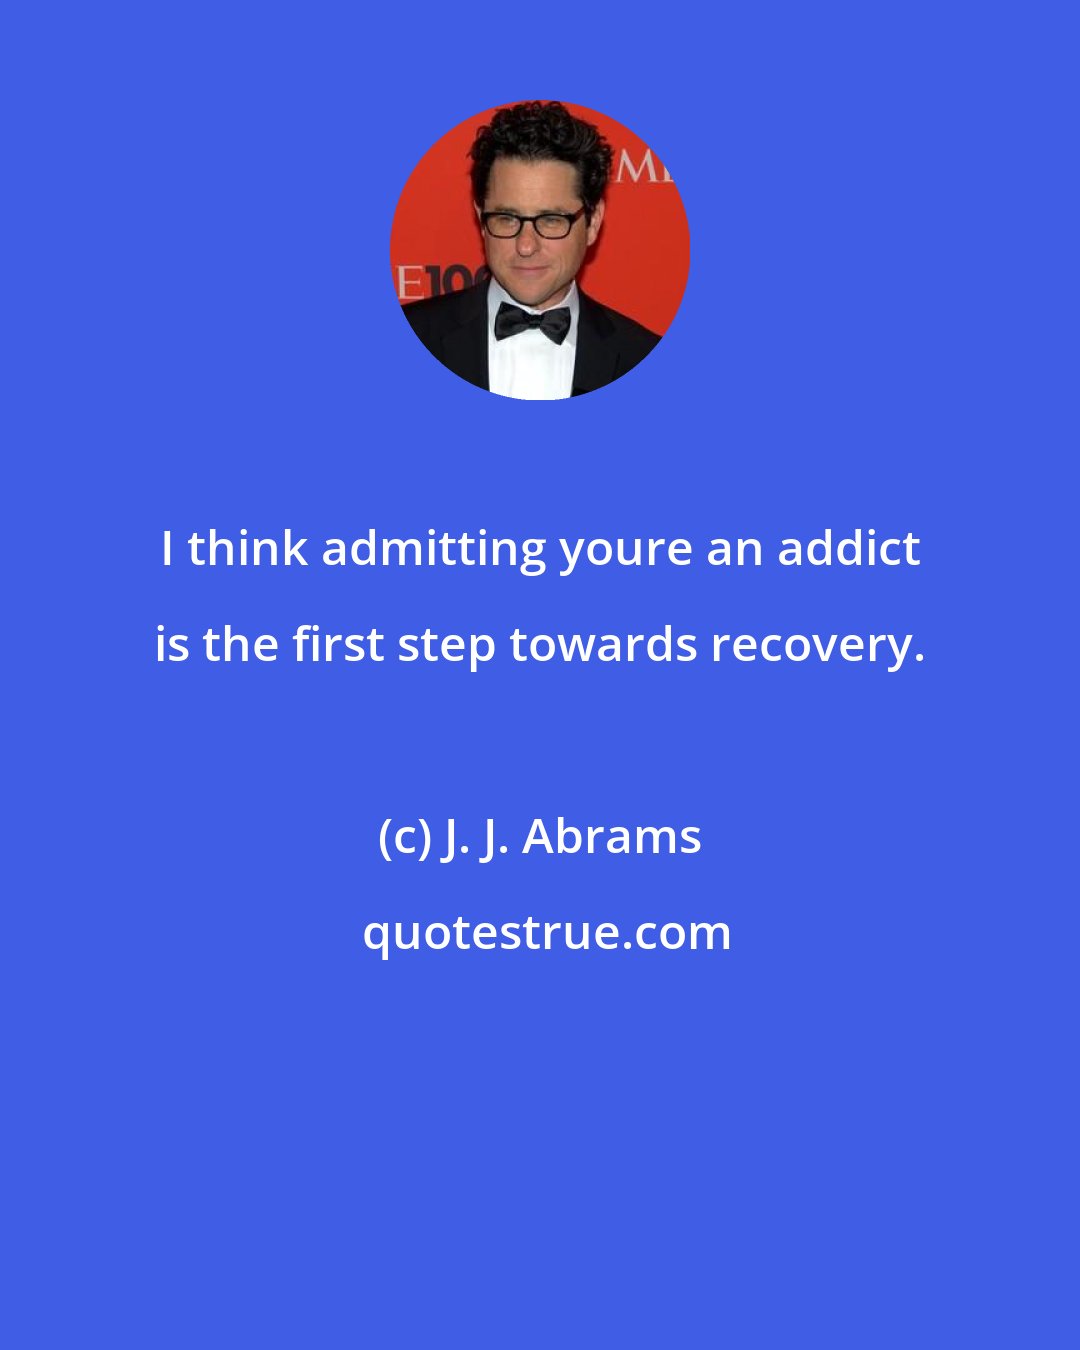 J. J. Abrams: I think admitting youre an addict is the first step towards recovery.